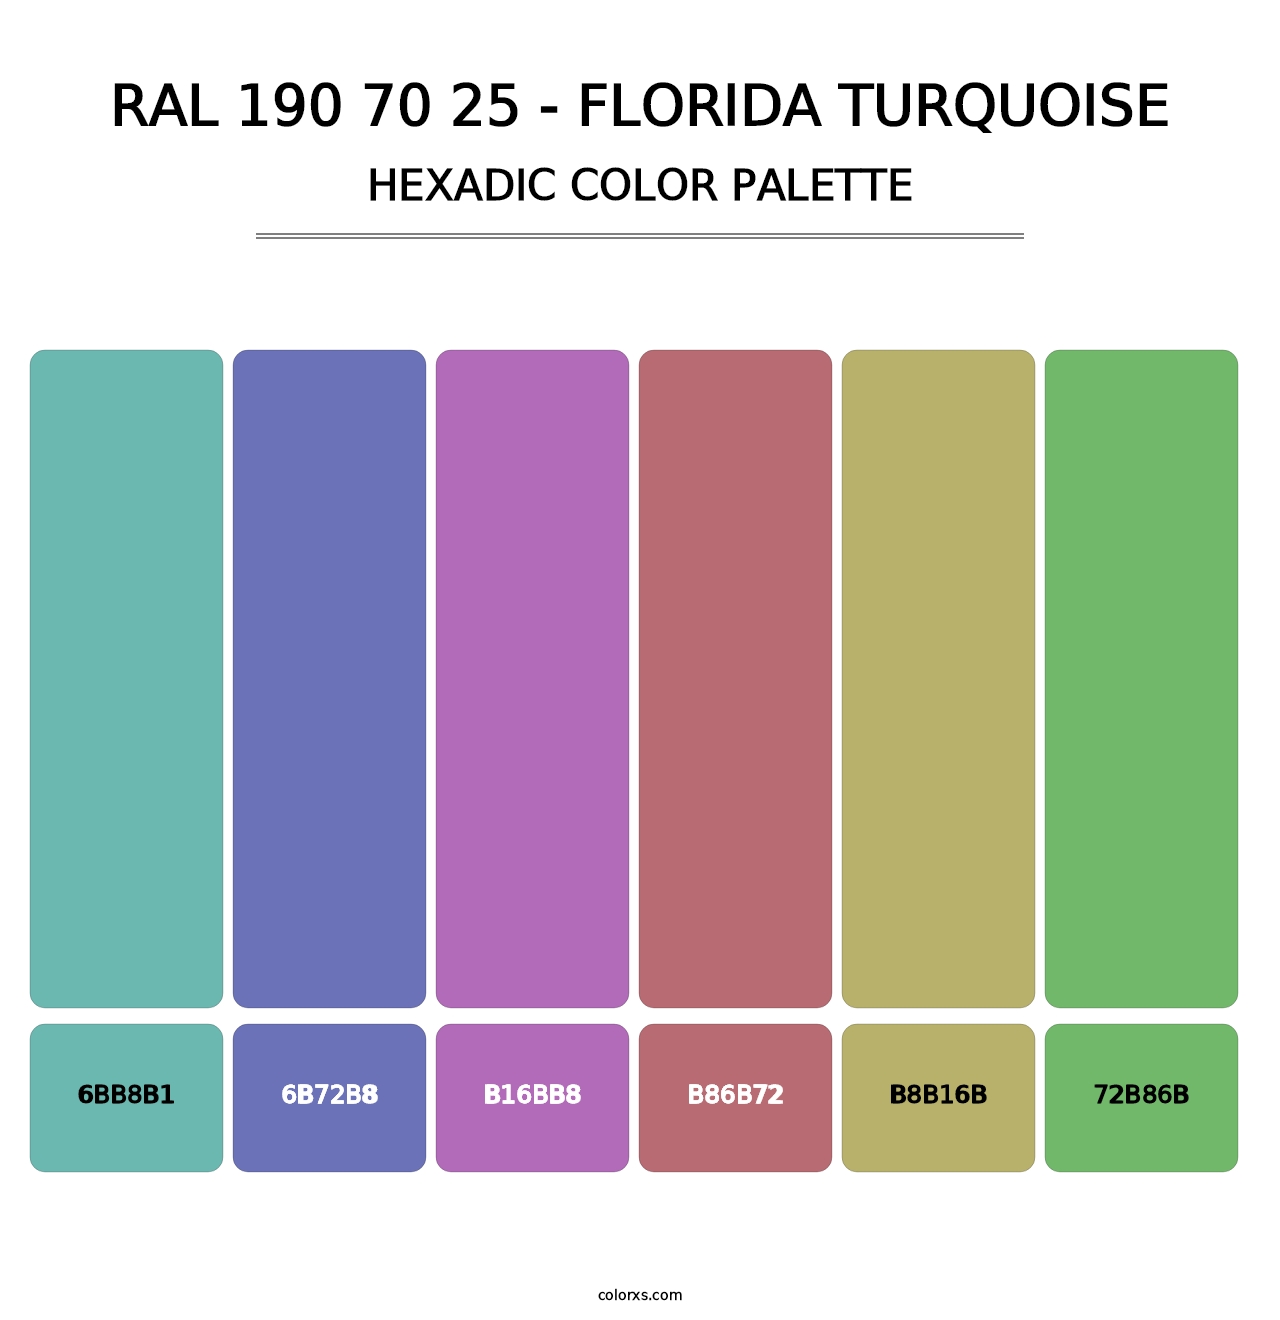 RAL 190 70 25 - Florida Turquoise - Hexadic Color Palette